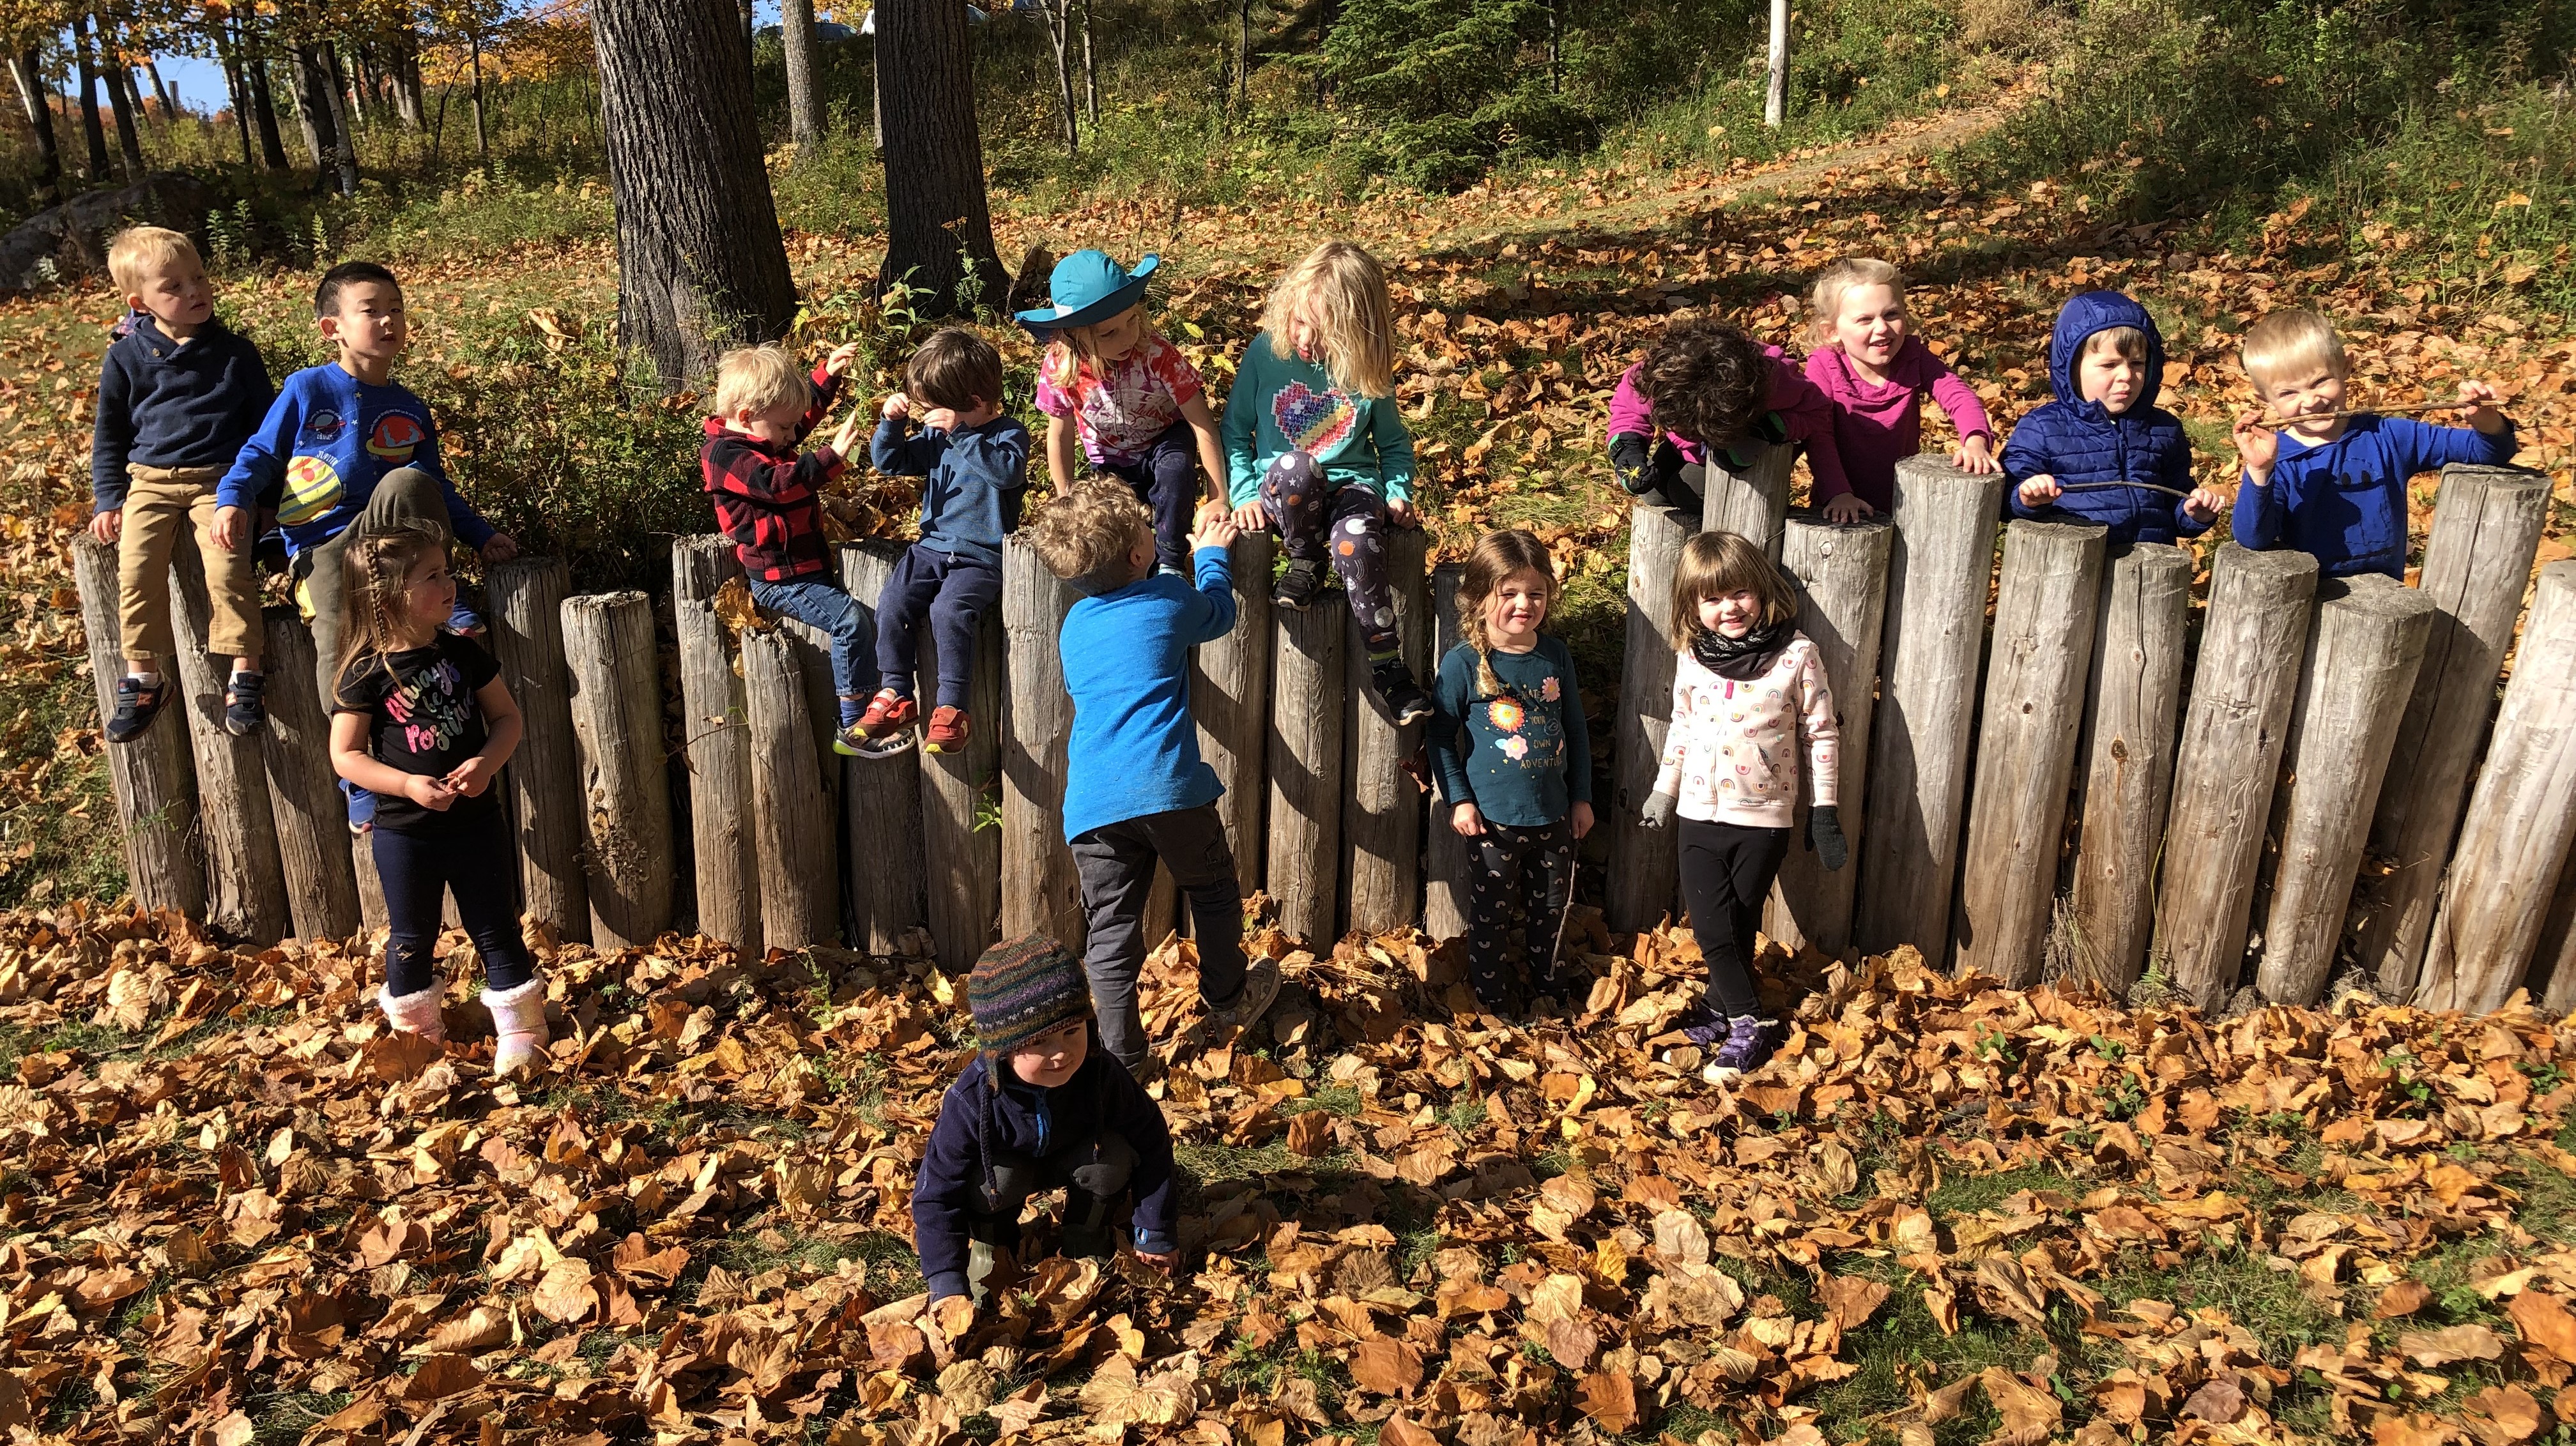 Preschoolers smiling by stood up wood logs on a sunny autumn day 